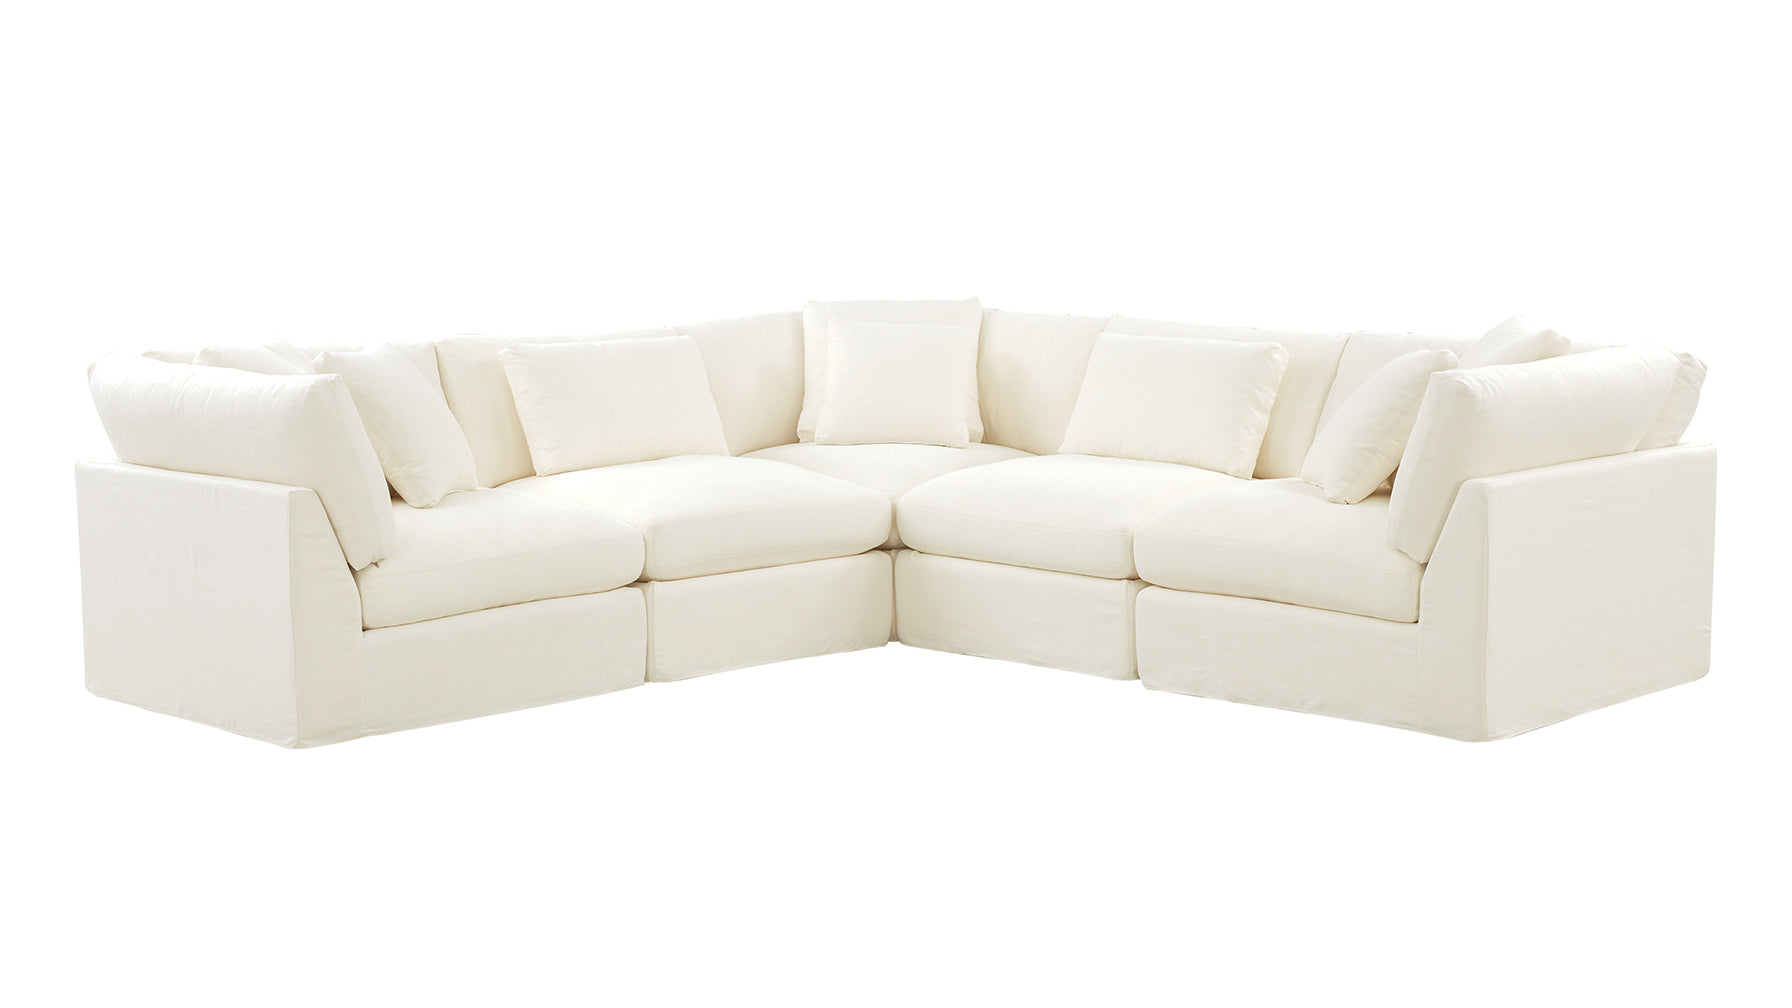 Get Together™ 5-Piece Modular Sectional Closed, Large, Cream Linen - Image 5